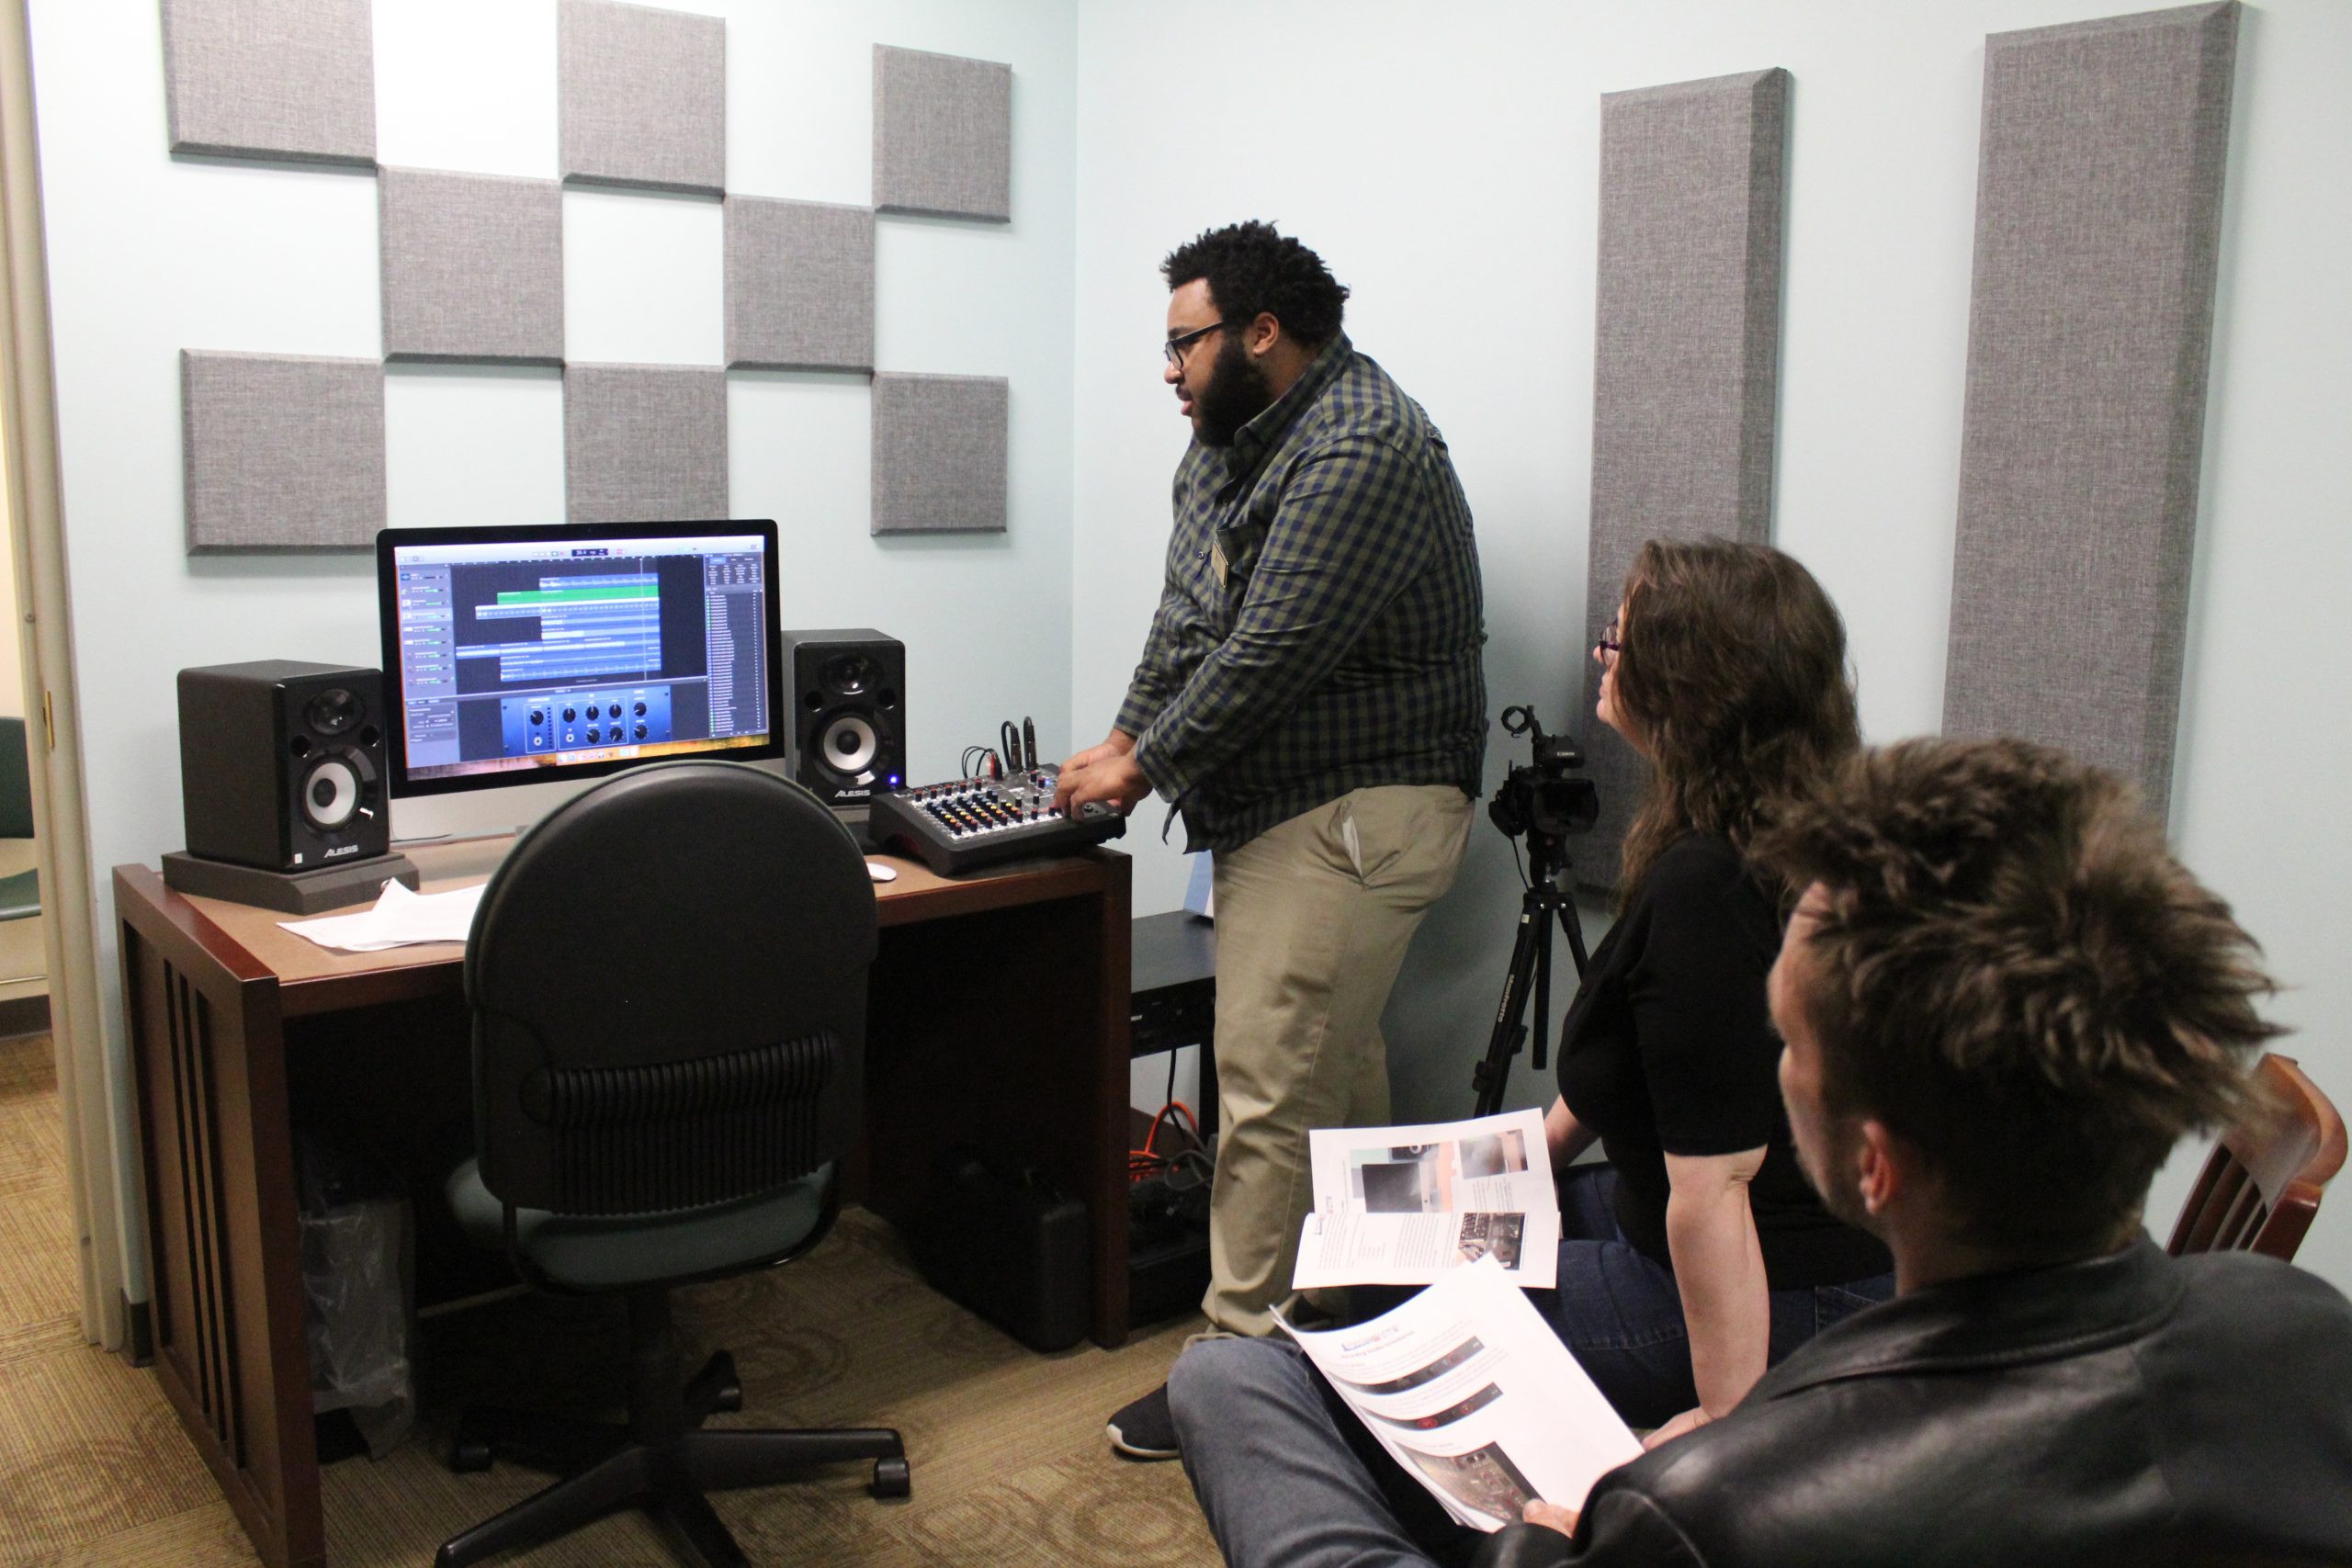 Recording Studio Orientation class located inside the library